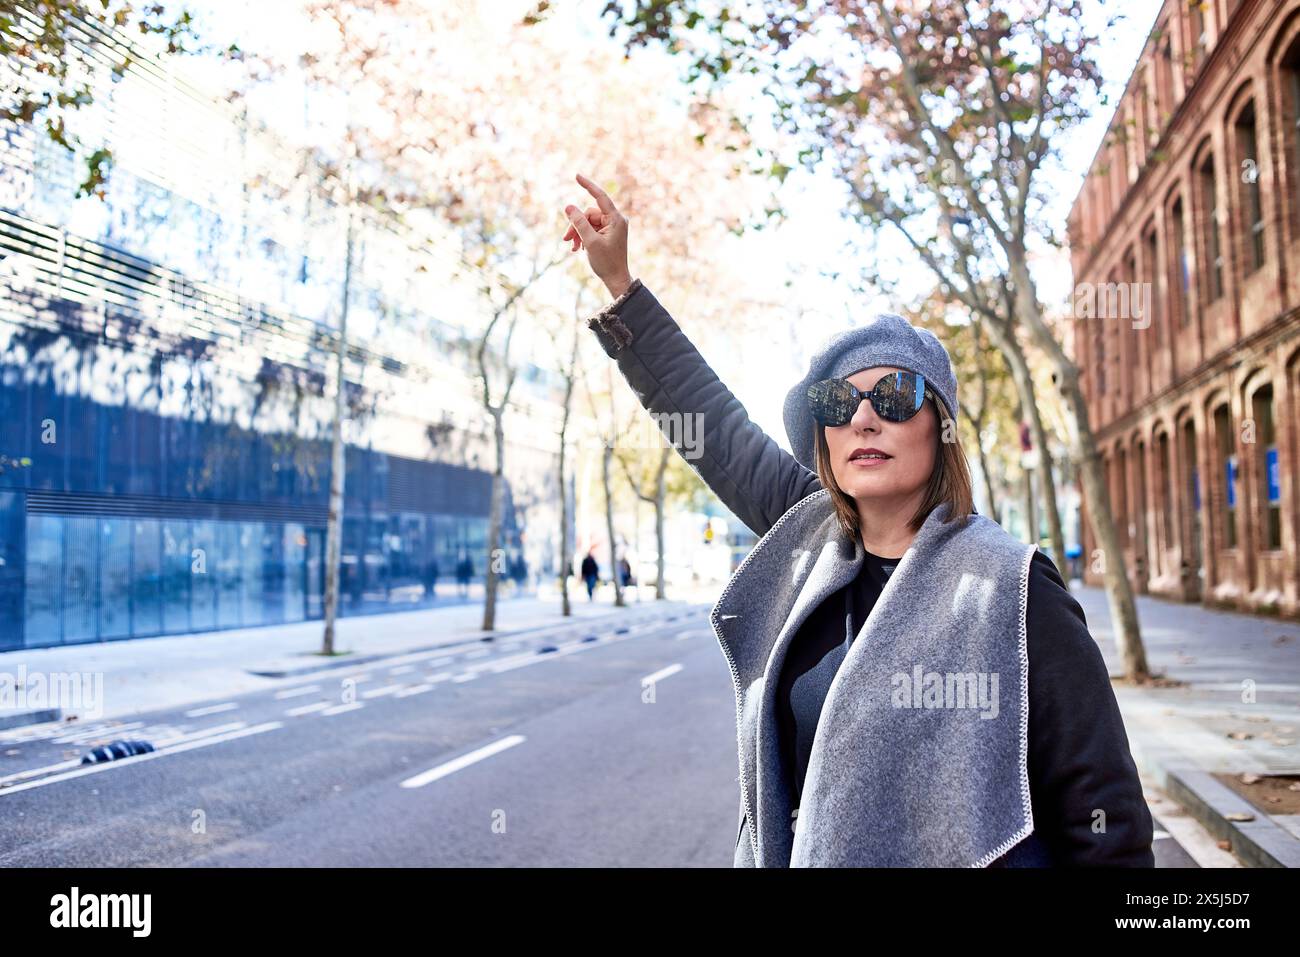 Stylish woman hailing a cab on a quiet city street Stock Photo